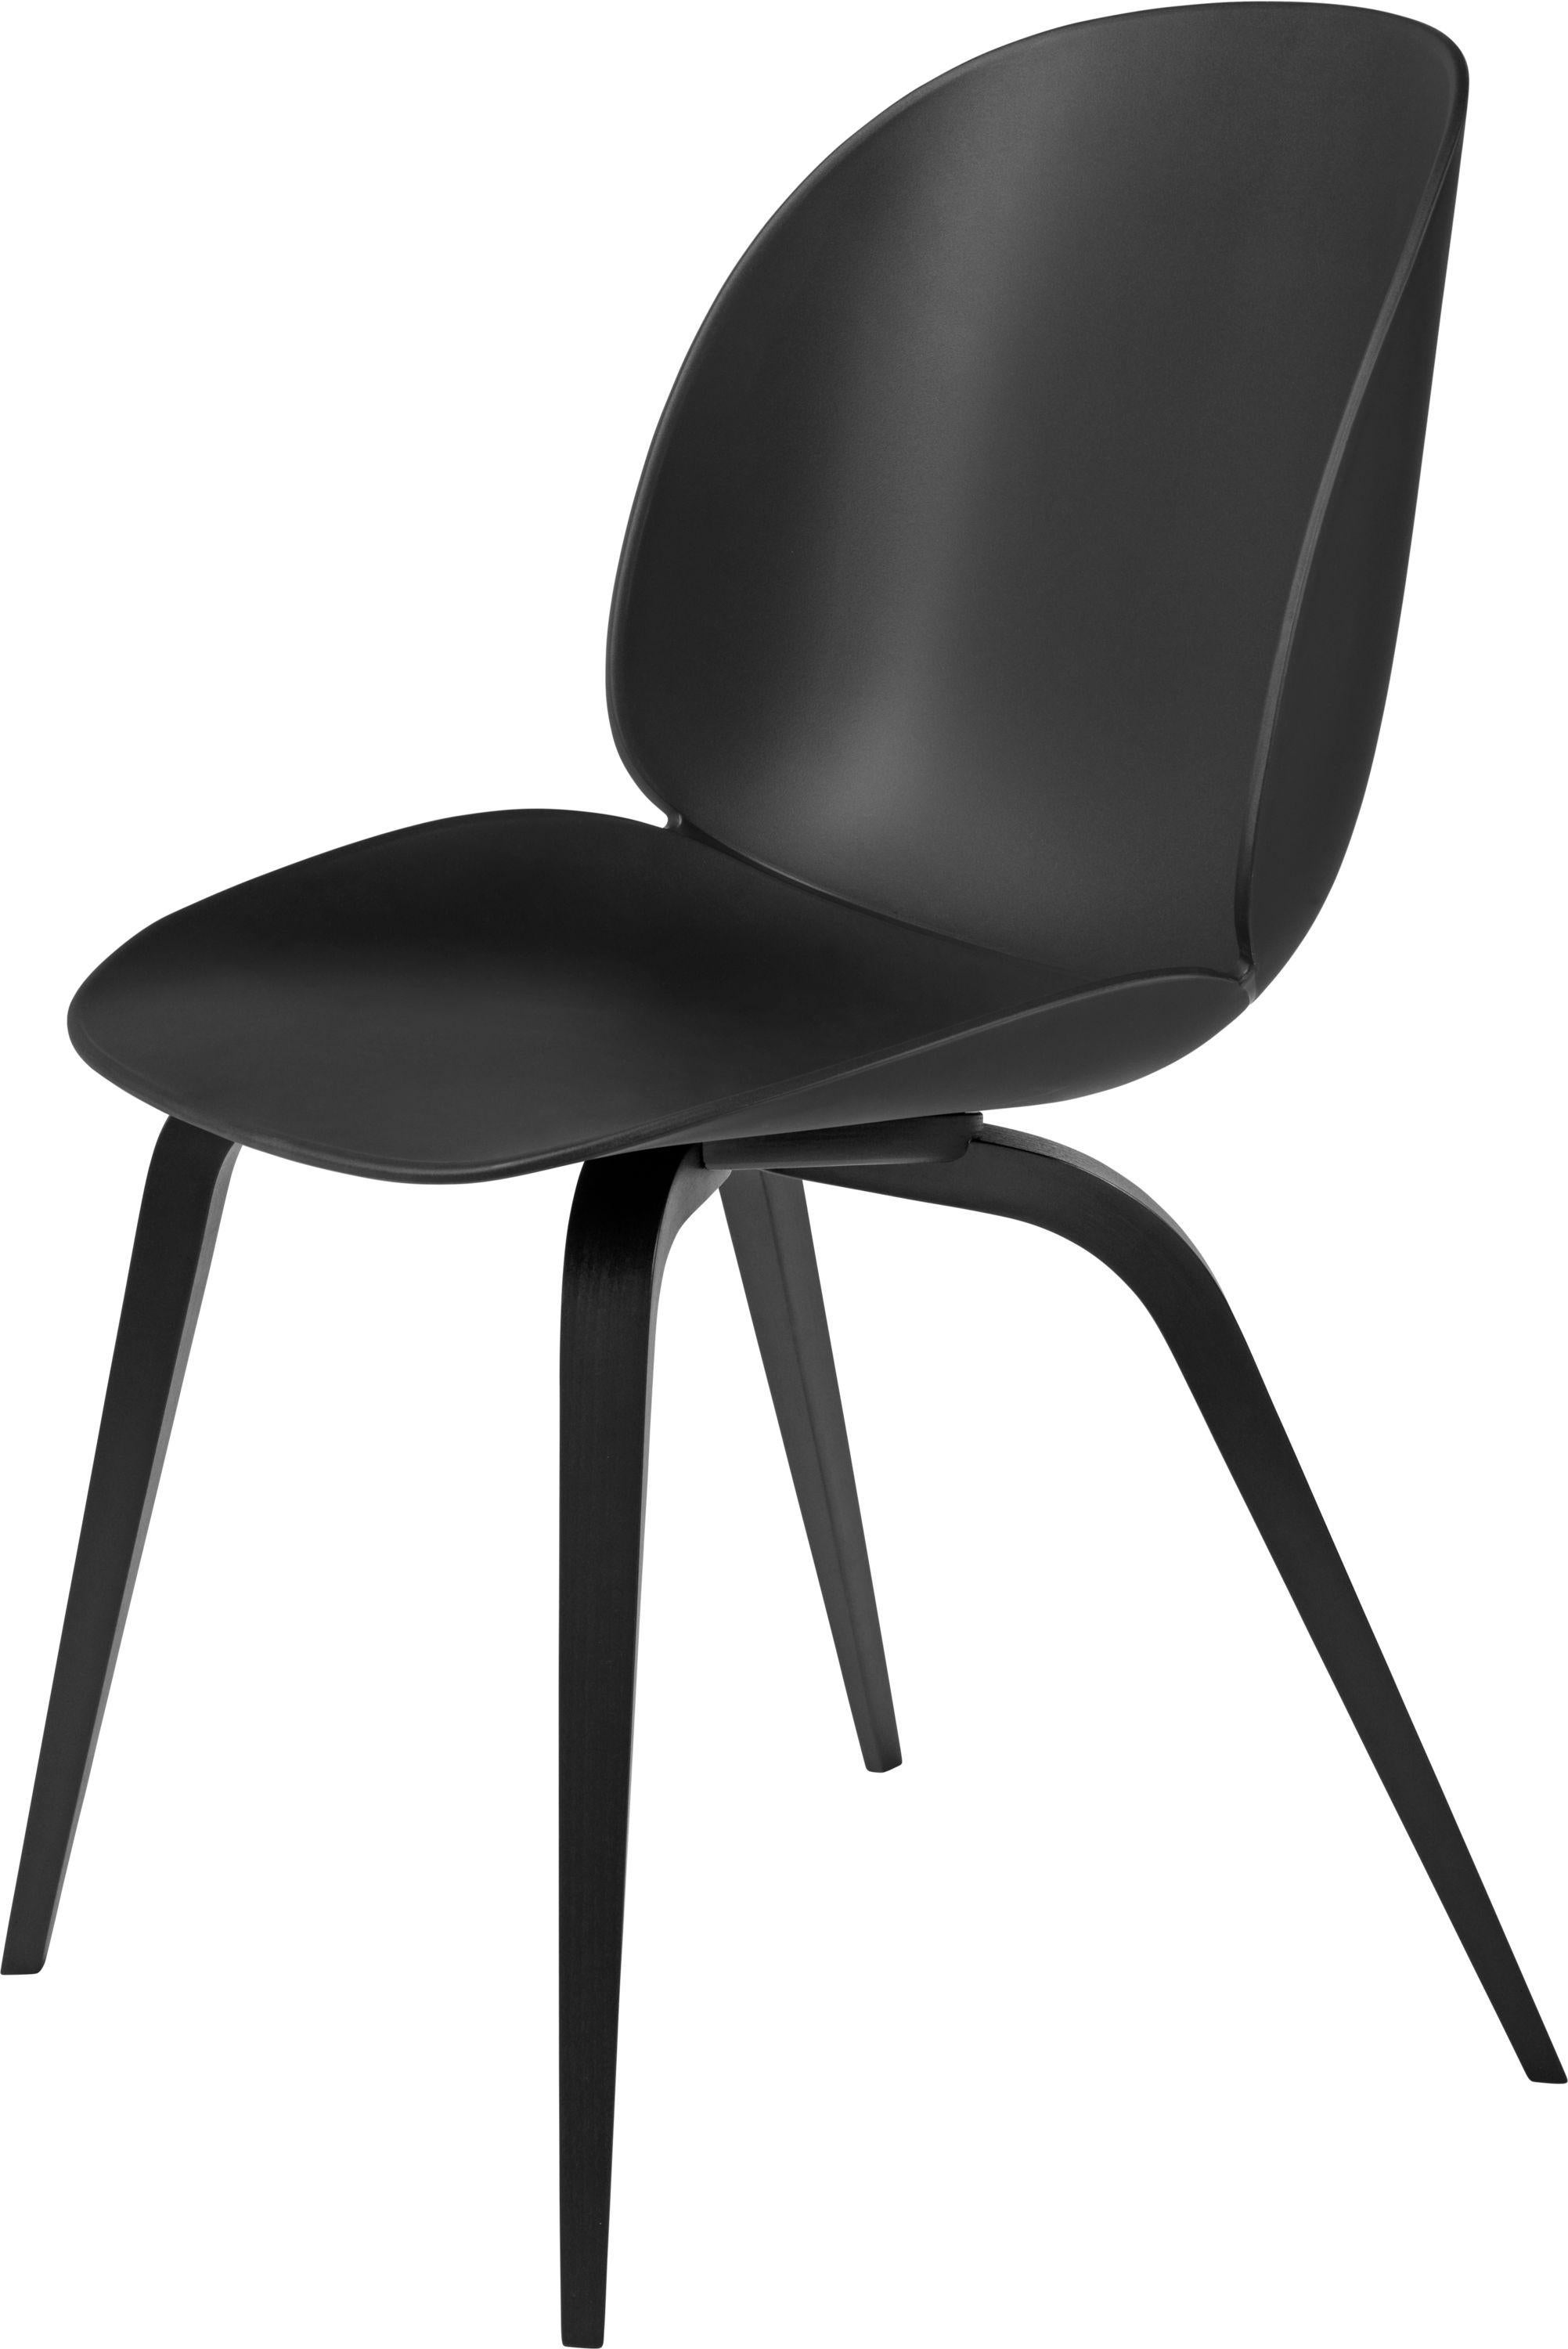 GamFratesi 'Beetle' Dining Chair with Black Stained Beech Conic Base 2